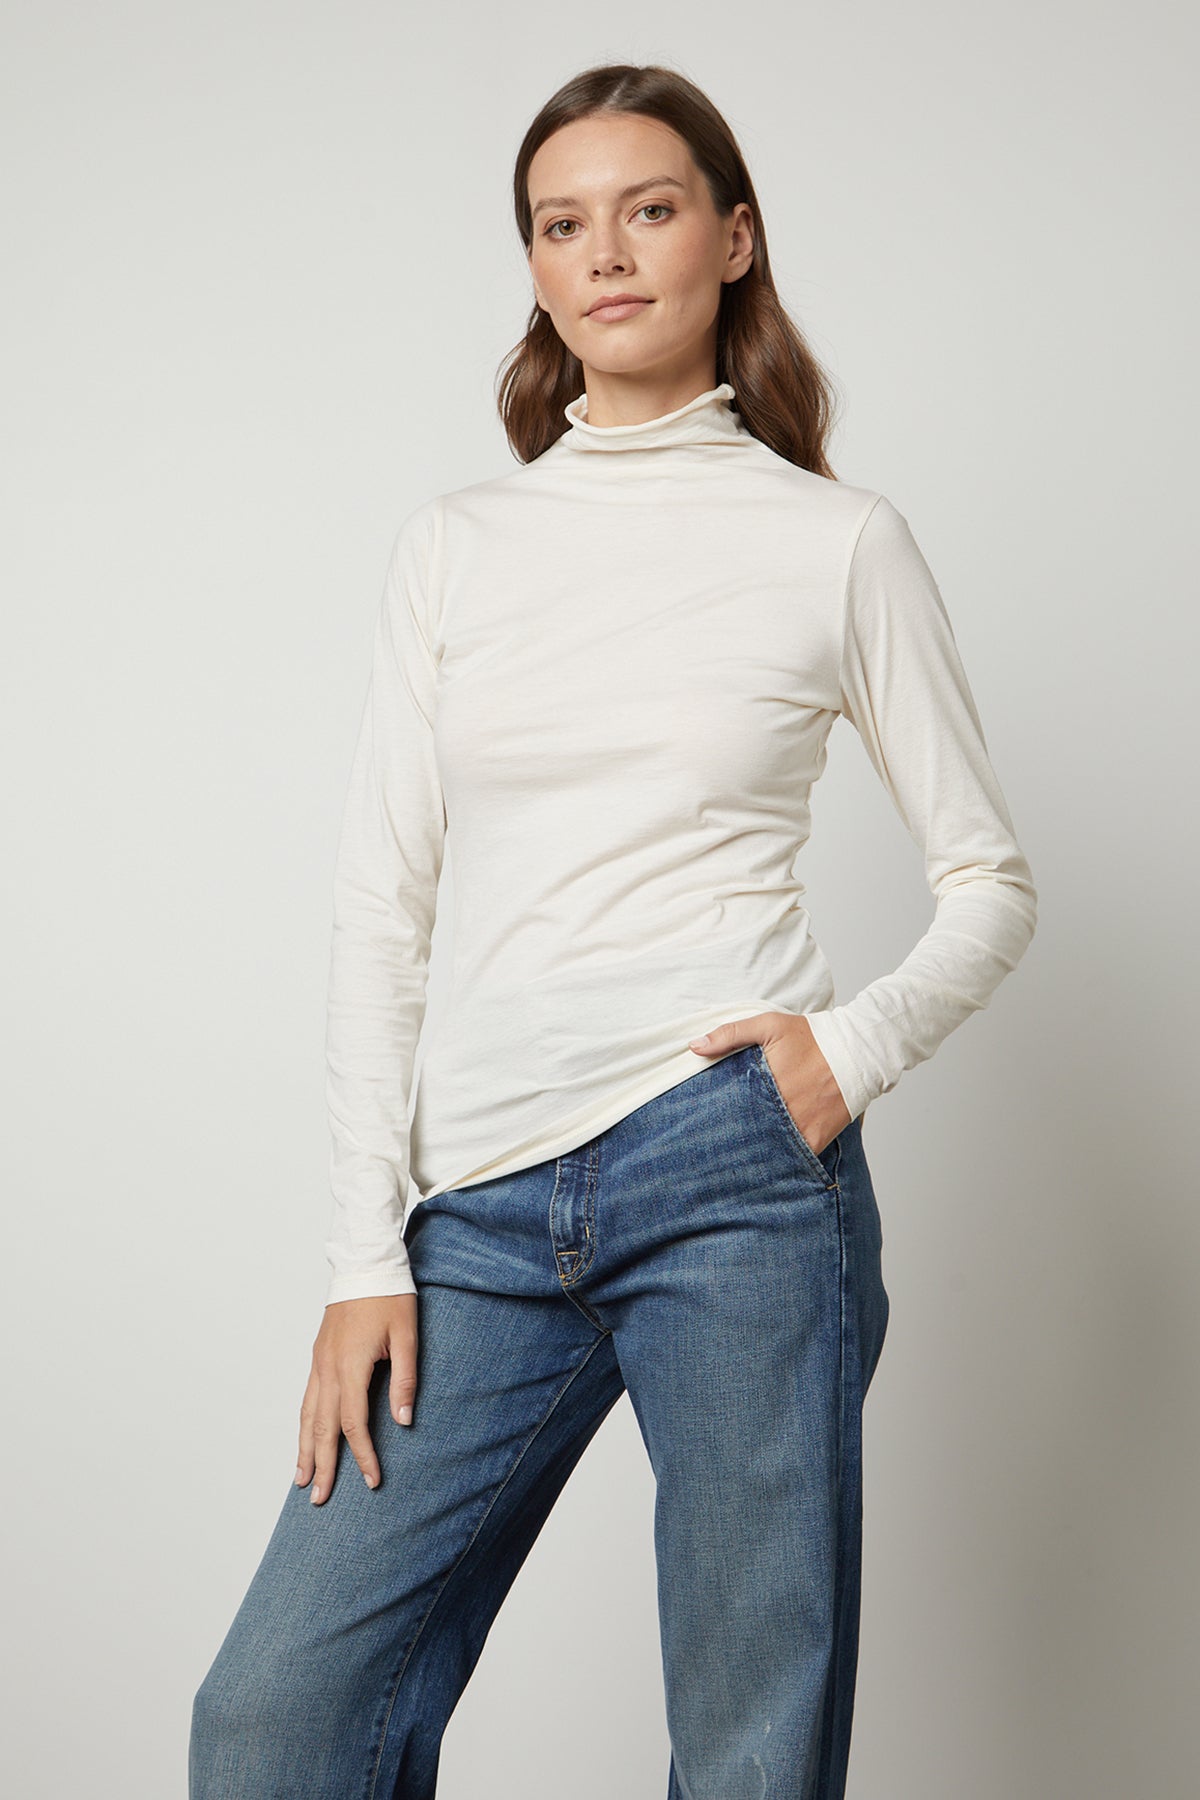 The model is wearing a Velvet by Graham & Spencer TALISIA GAUZY WHISPER FITTED MOCK NECK TEE, a wardrobe staple in the fashion world.-35230354079937